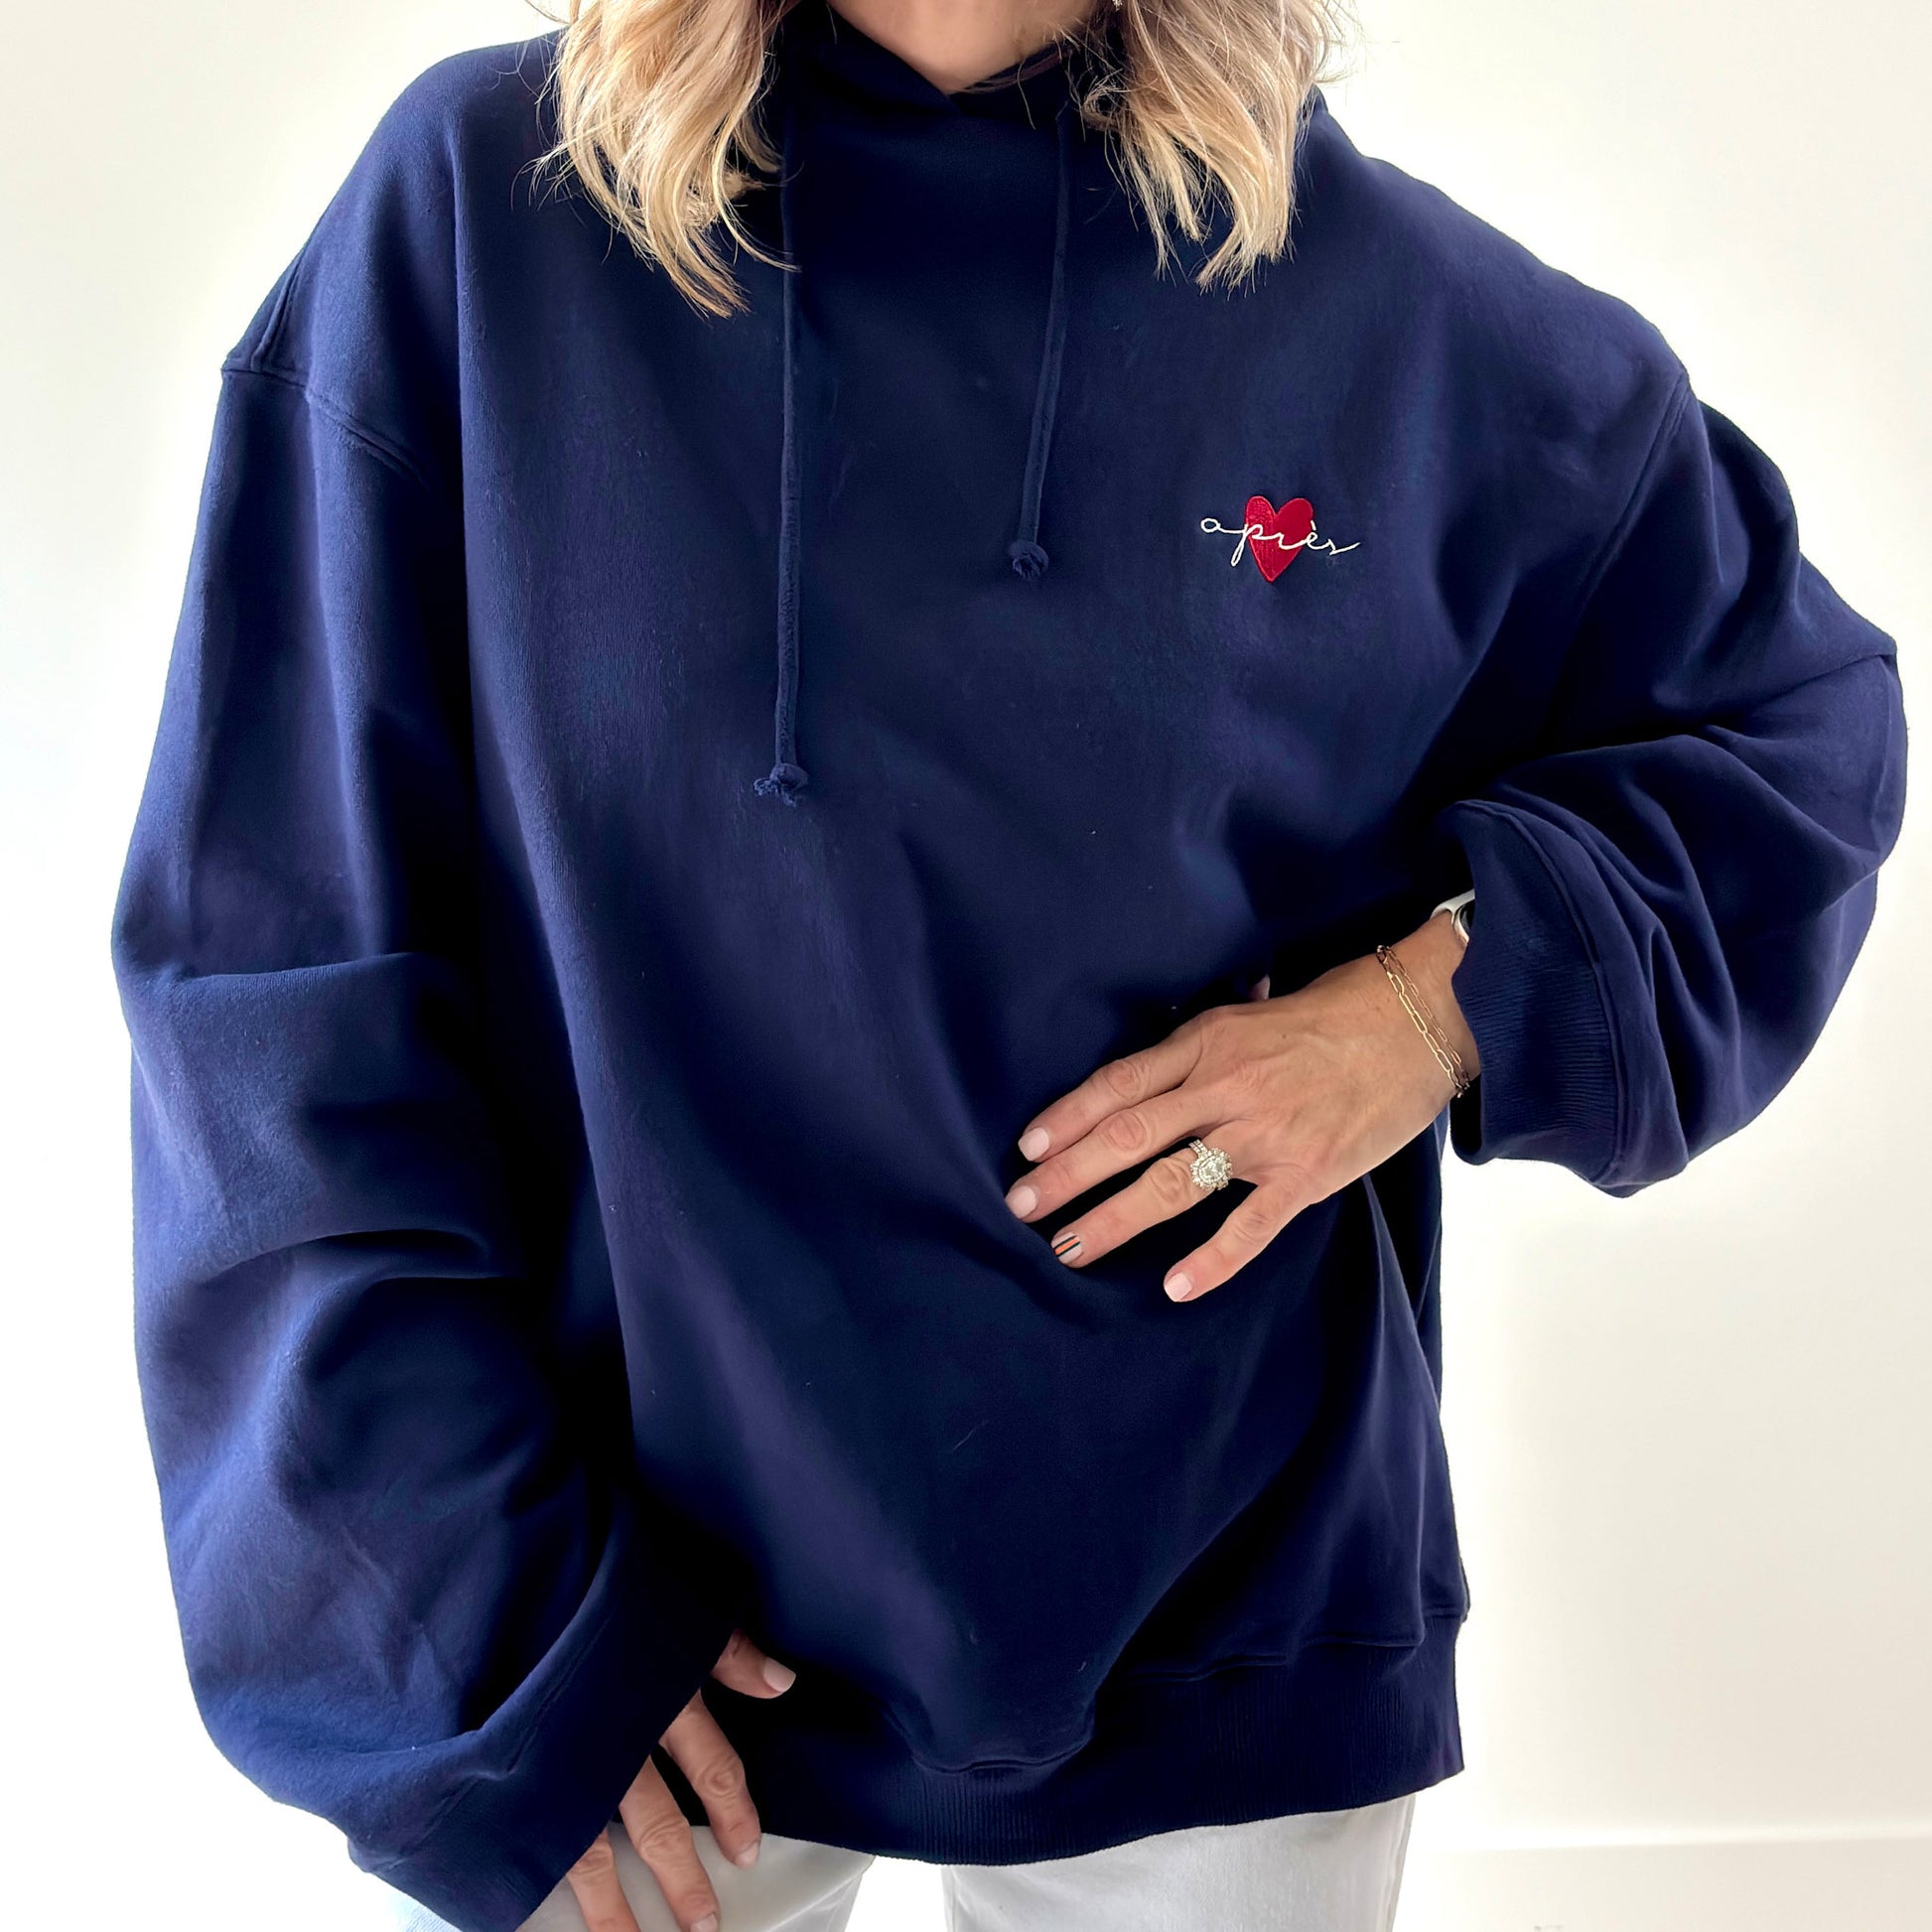 Women's navy pullover hooded oversized light weight fleece sweatshirt with script après and heart embroidery